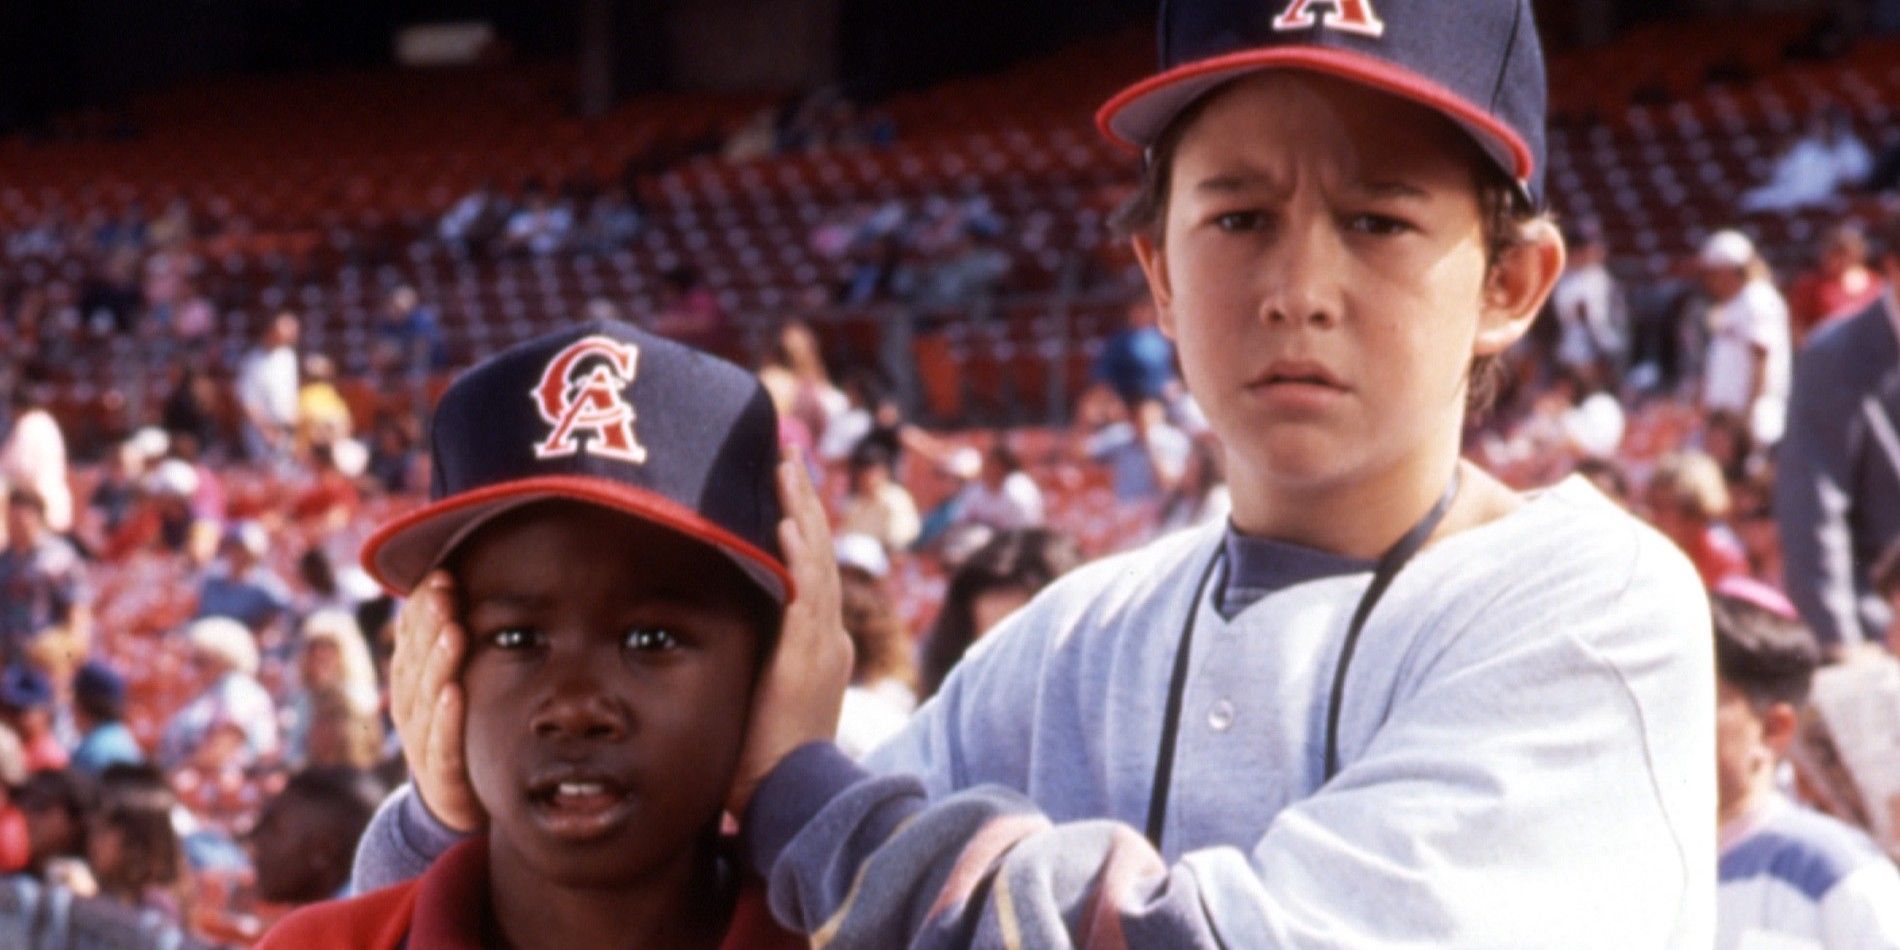 A kid with his hands over another kid's ears in Angels in the Outfield 